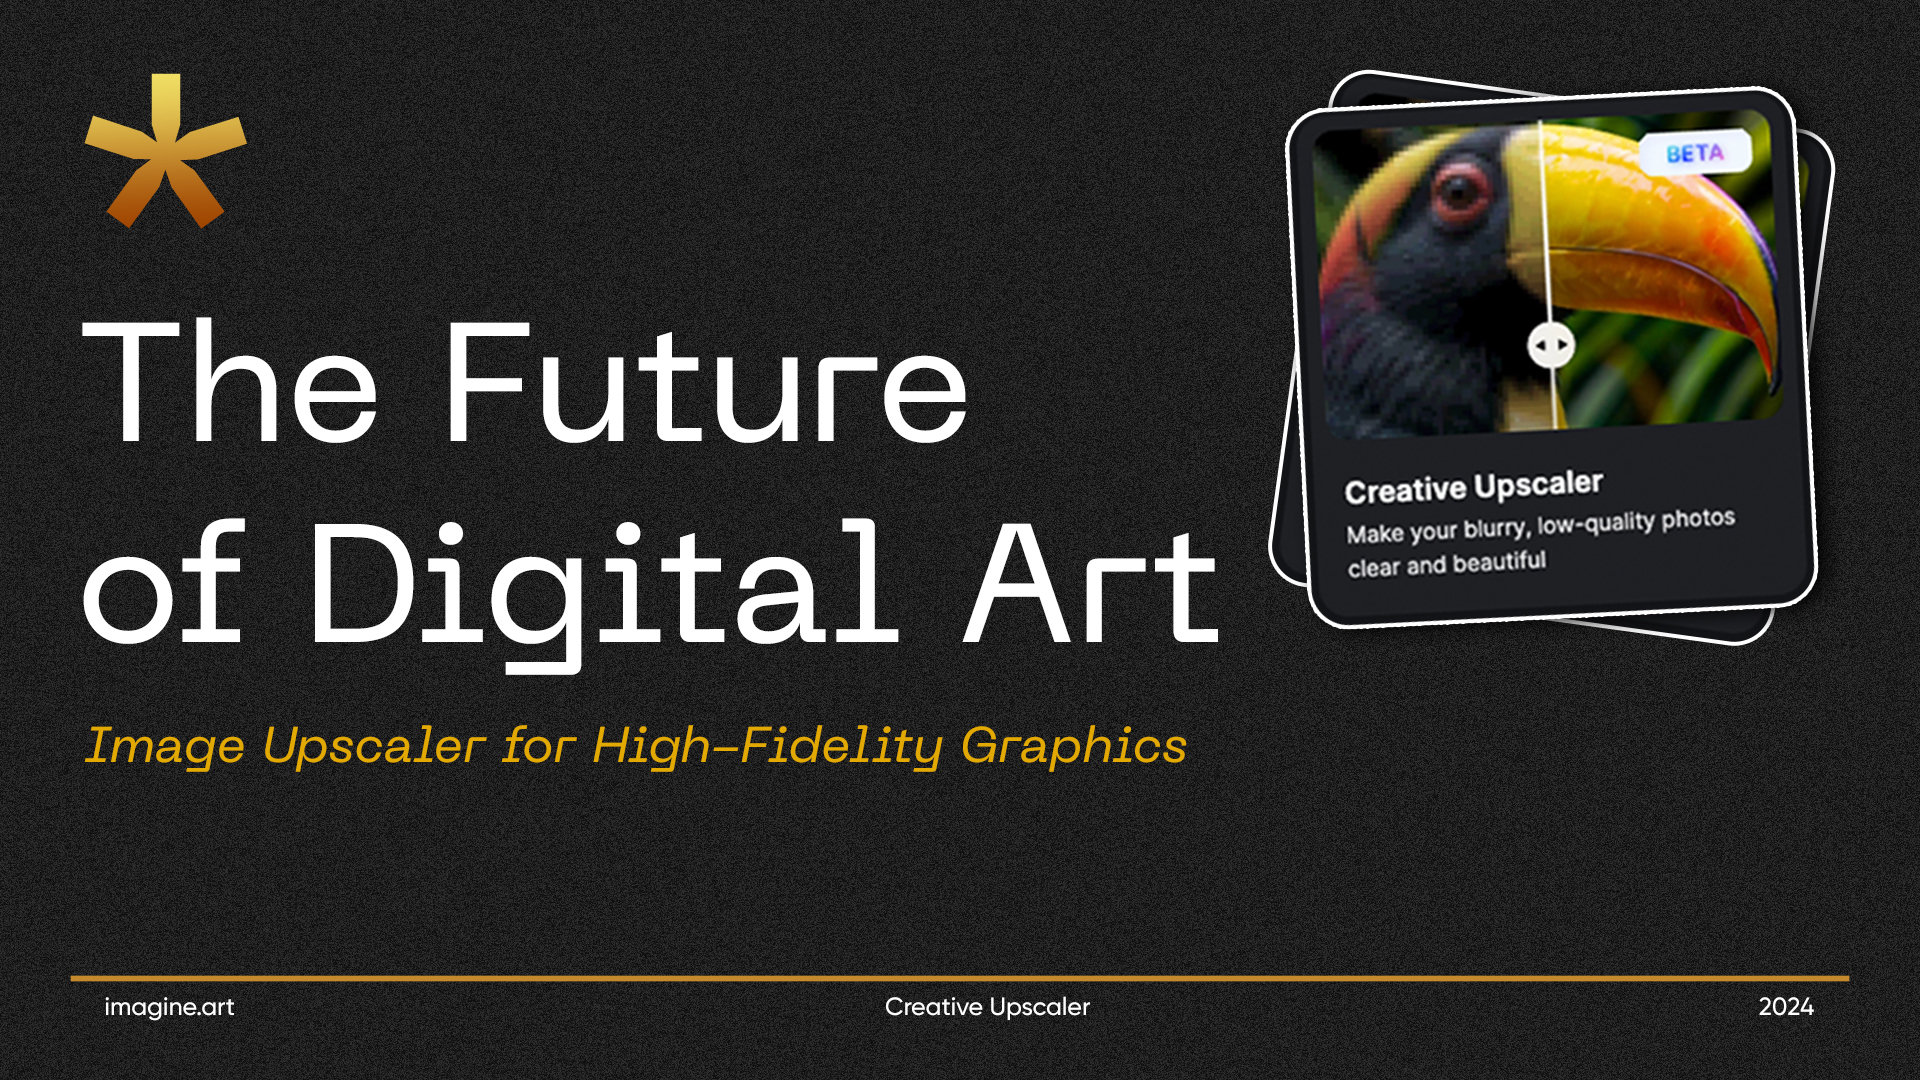 The Future of Digital Art: Image Upscaler for High-Fidelity Graphics